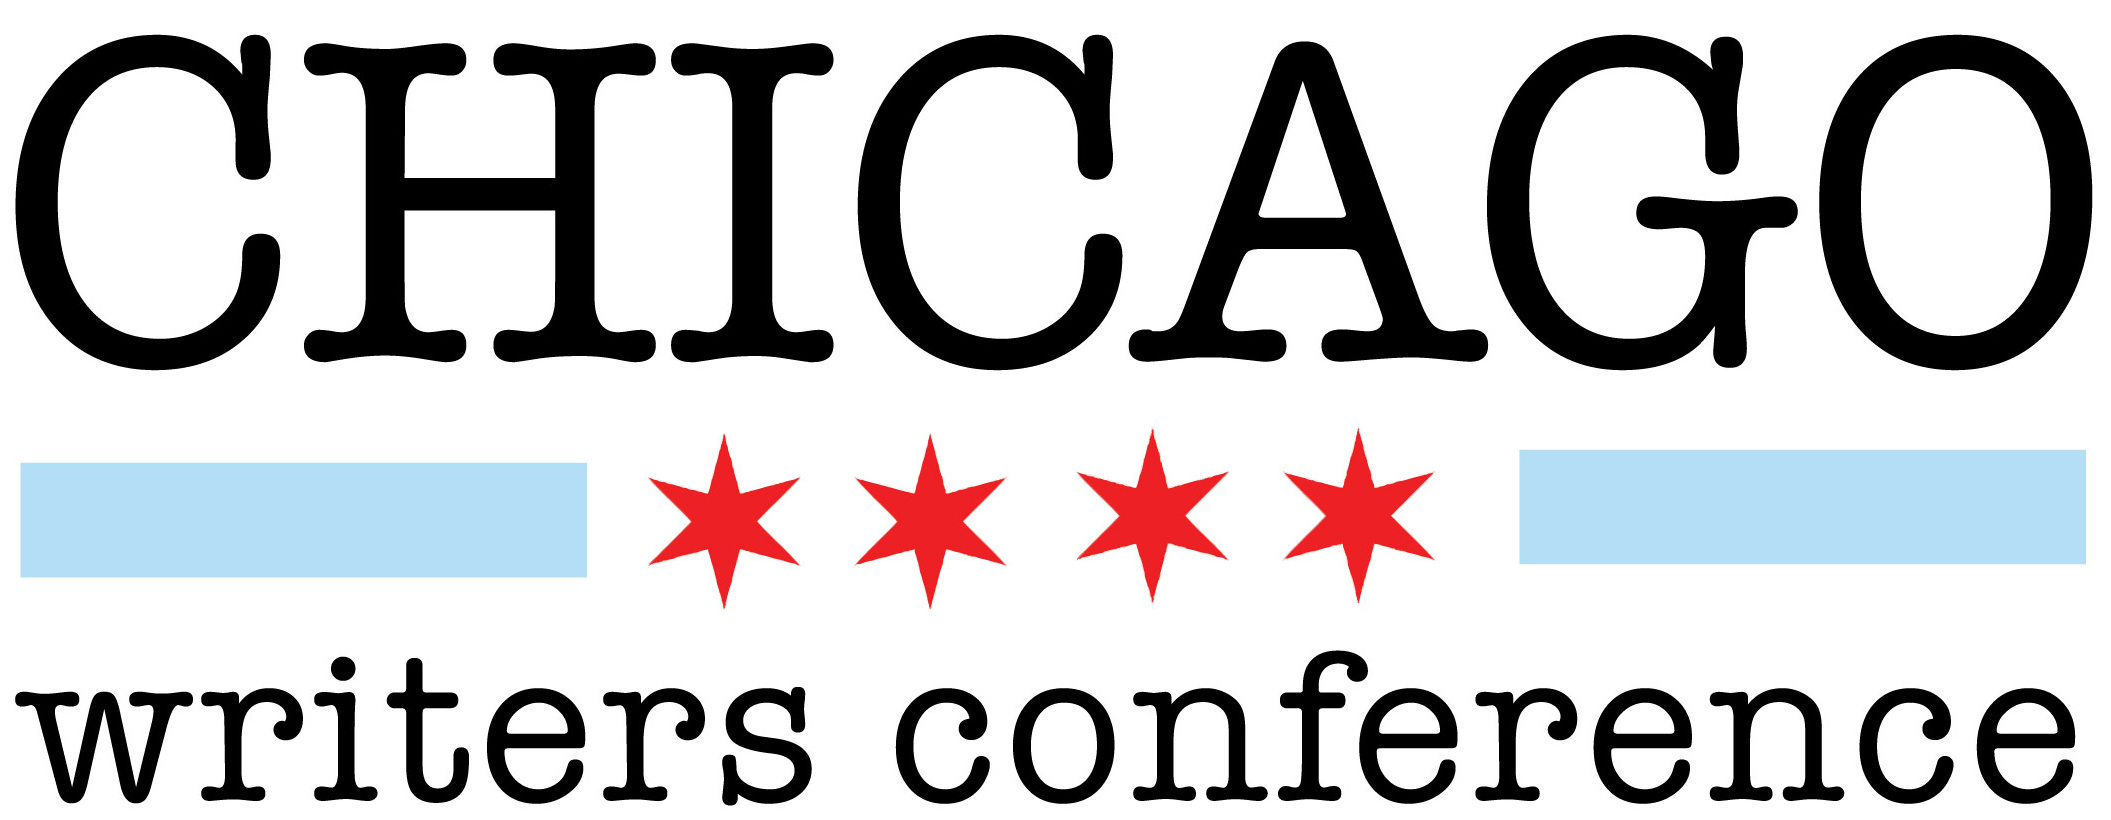 Chicago-Writers-Conference4.jpg